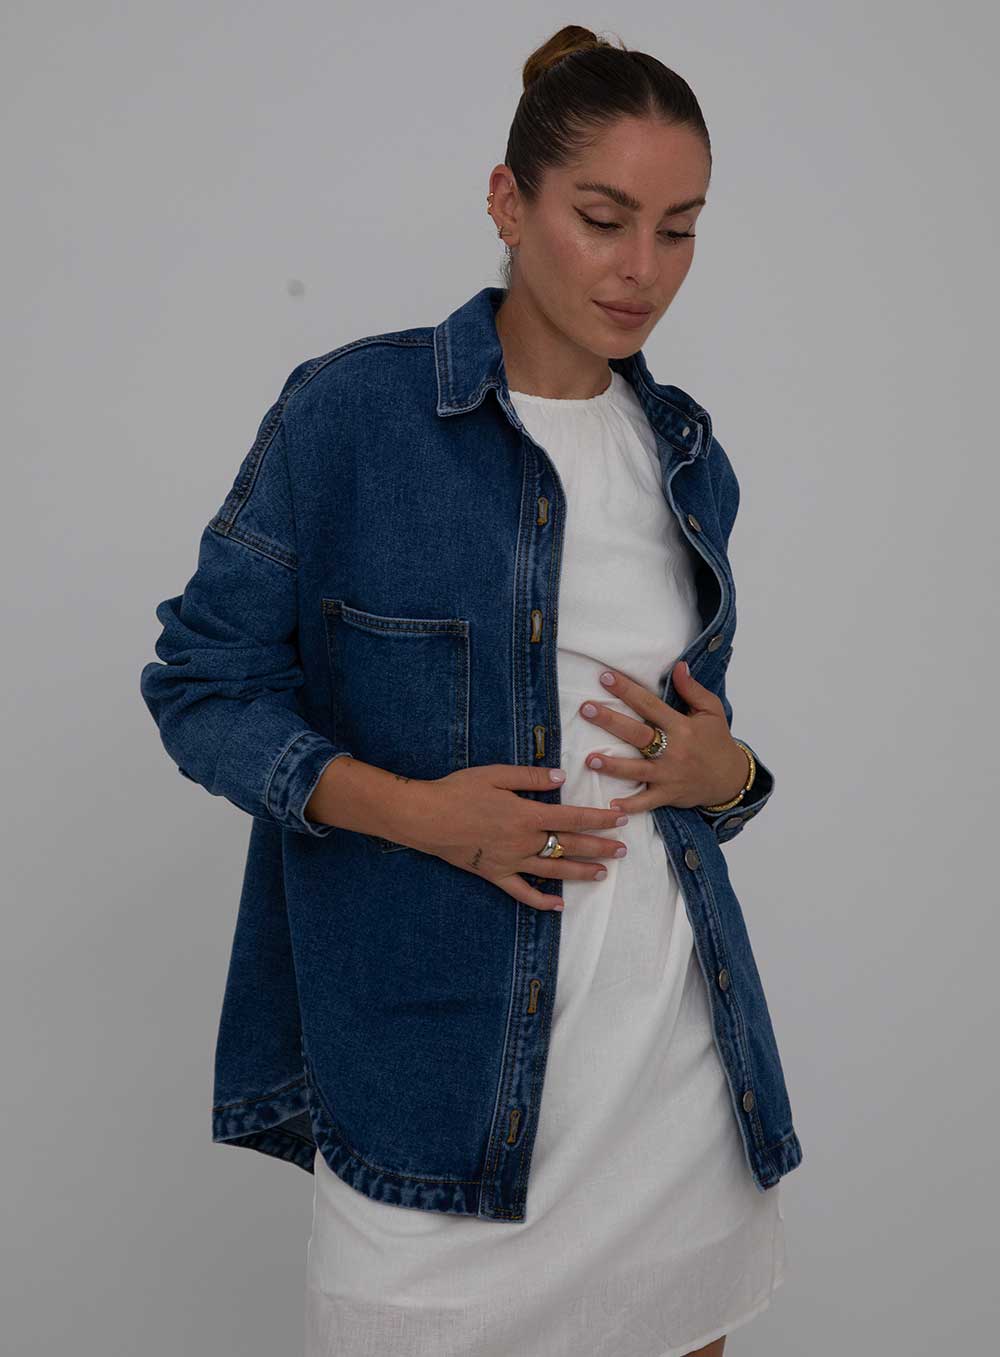 The Wake Up Denim Jacket in dark blue features full button through front, collar at the neck line, 2 large chest pockets, 2 side pockets, functional button down cuff adn scoop hem.